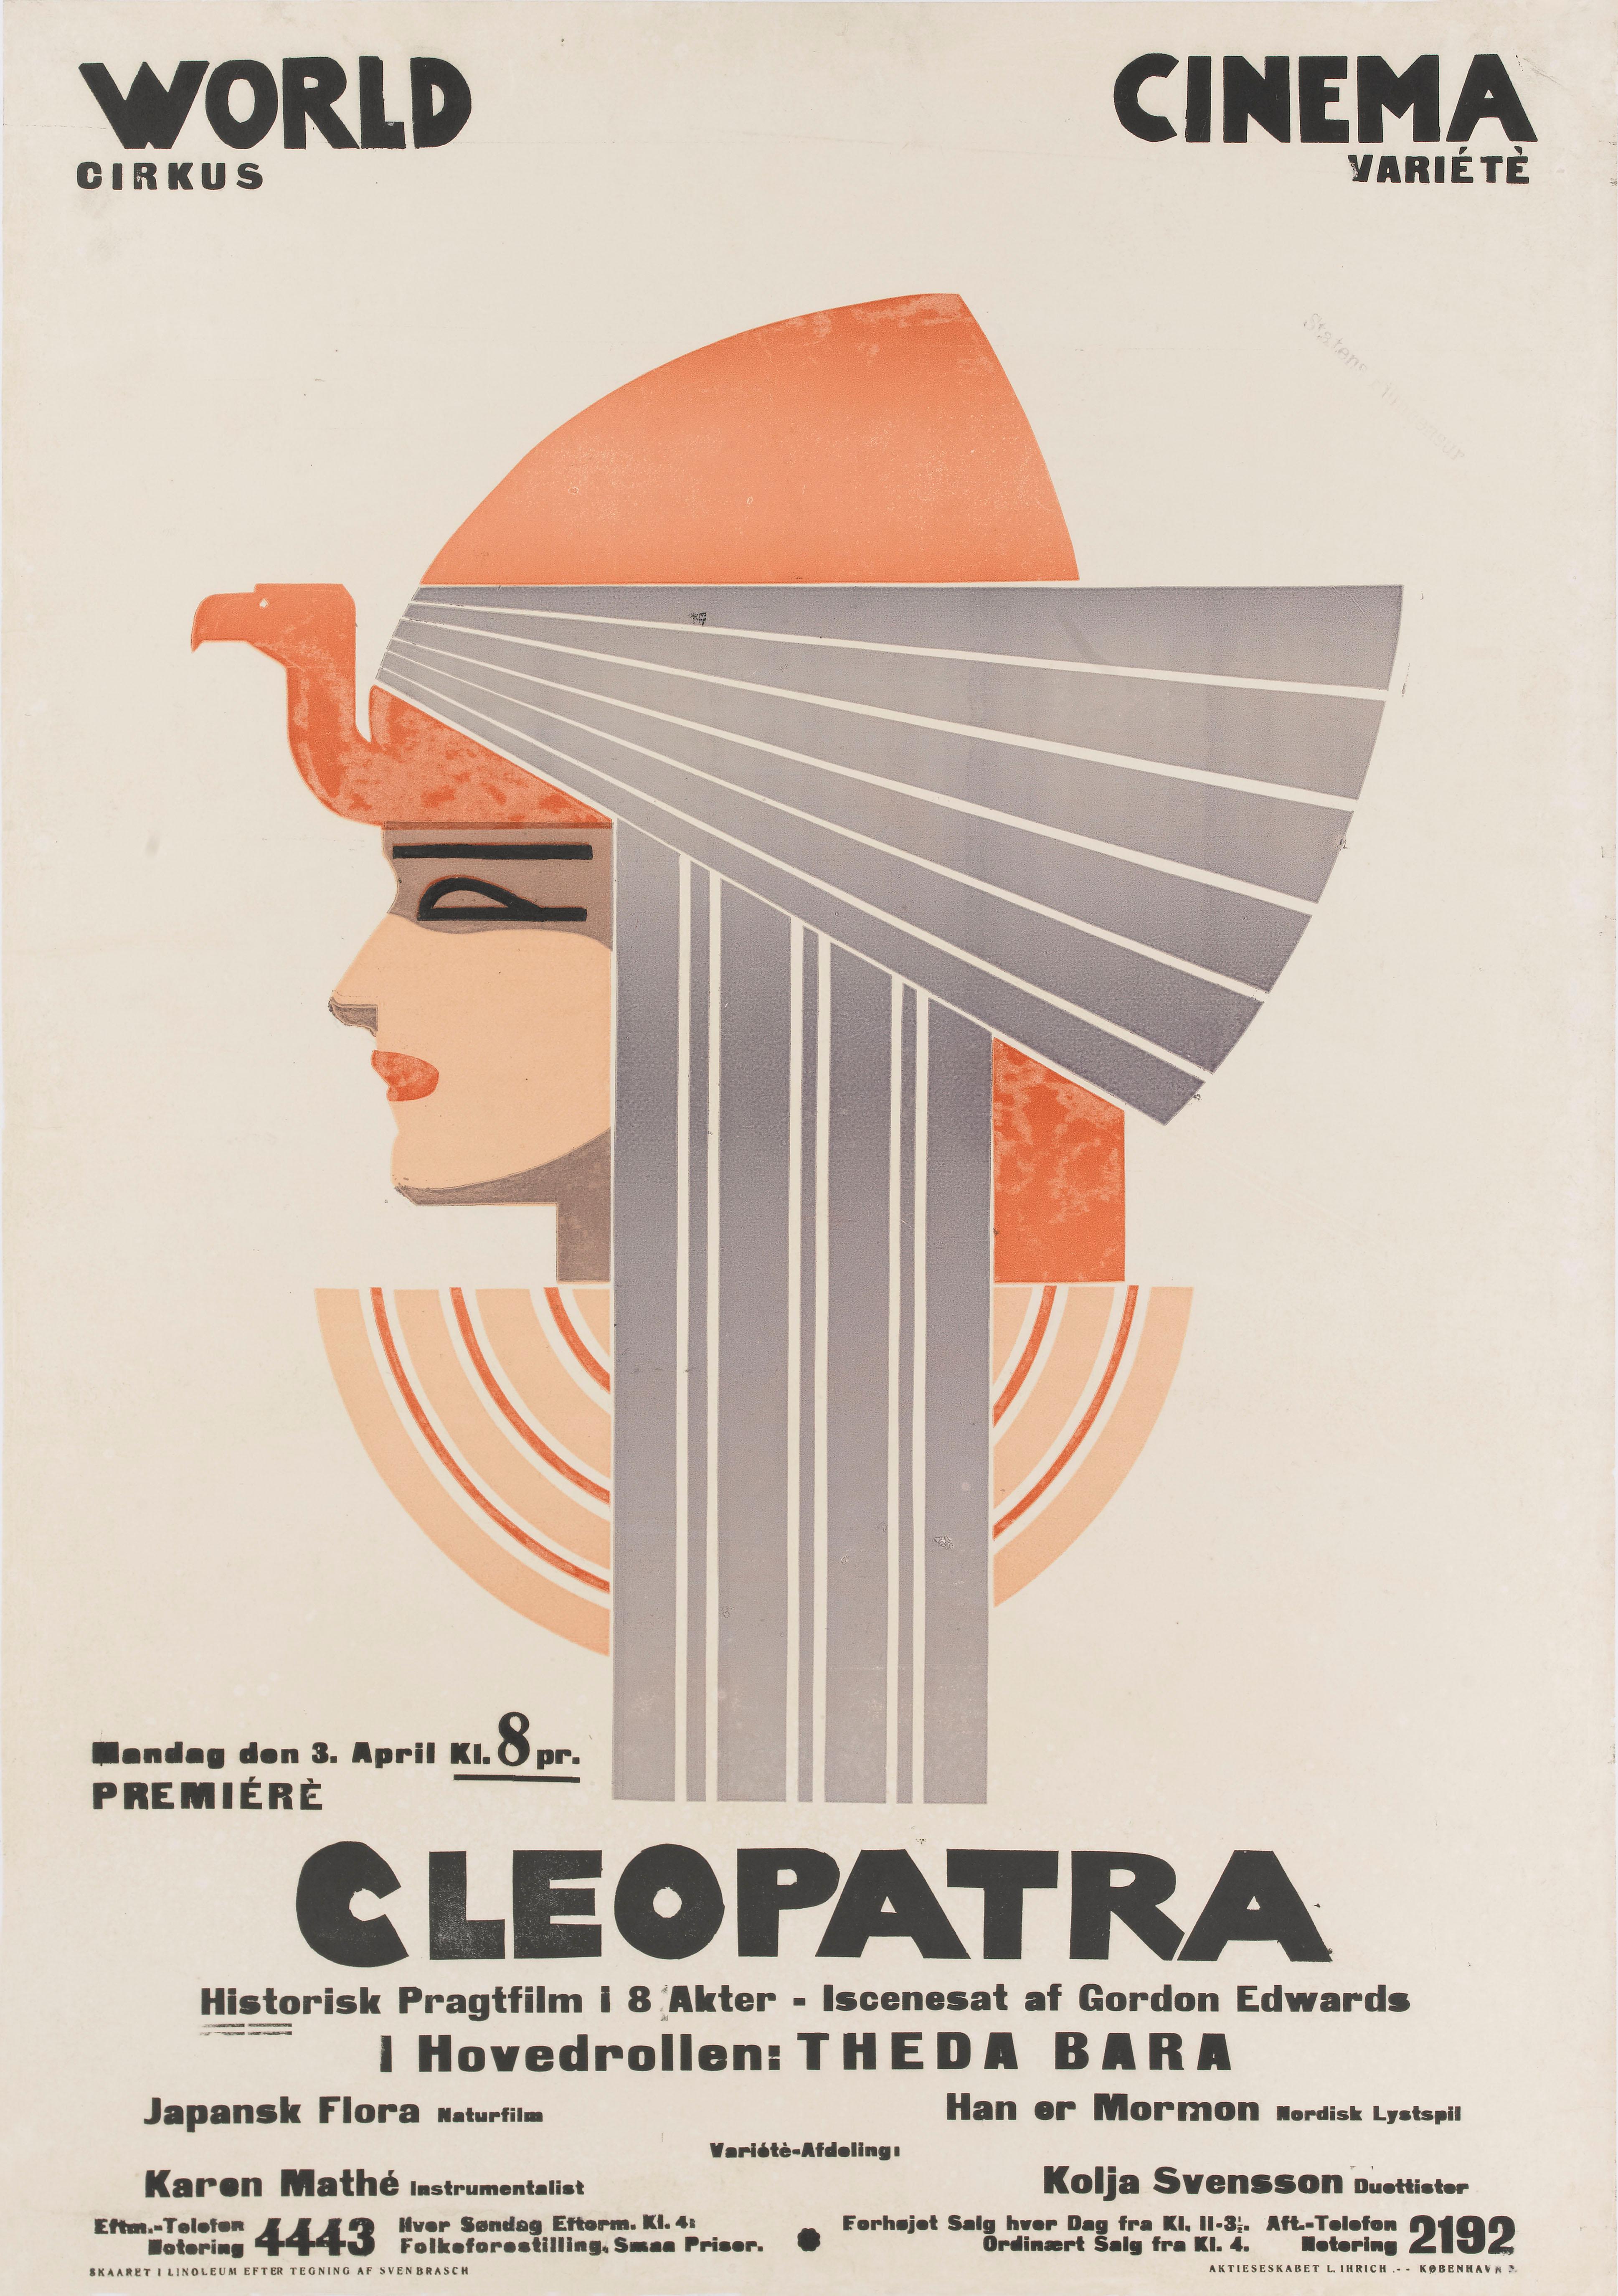 Original Danish film poster. First Danish release 1921.

All that remains today of the 1917 silent film Cleopatra is one brittle fragment, lasting no more than a few seconds. At the time, the film was one of the
biggest, most expensive productions